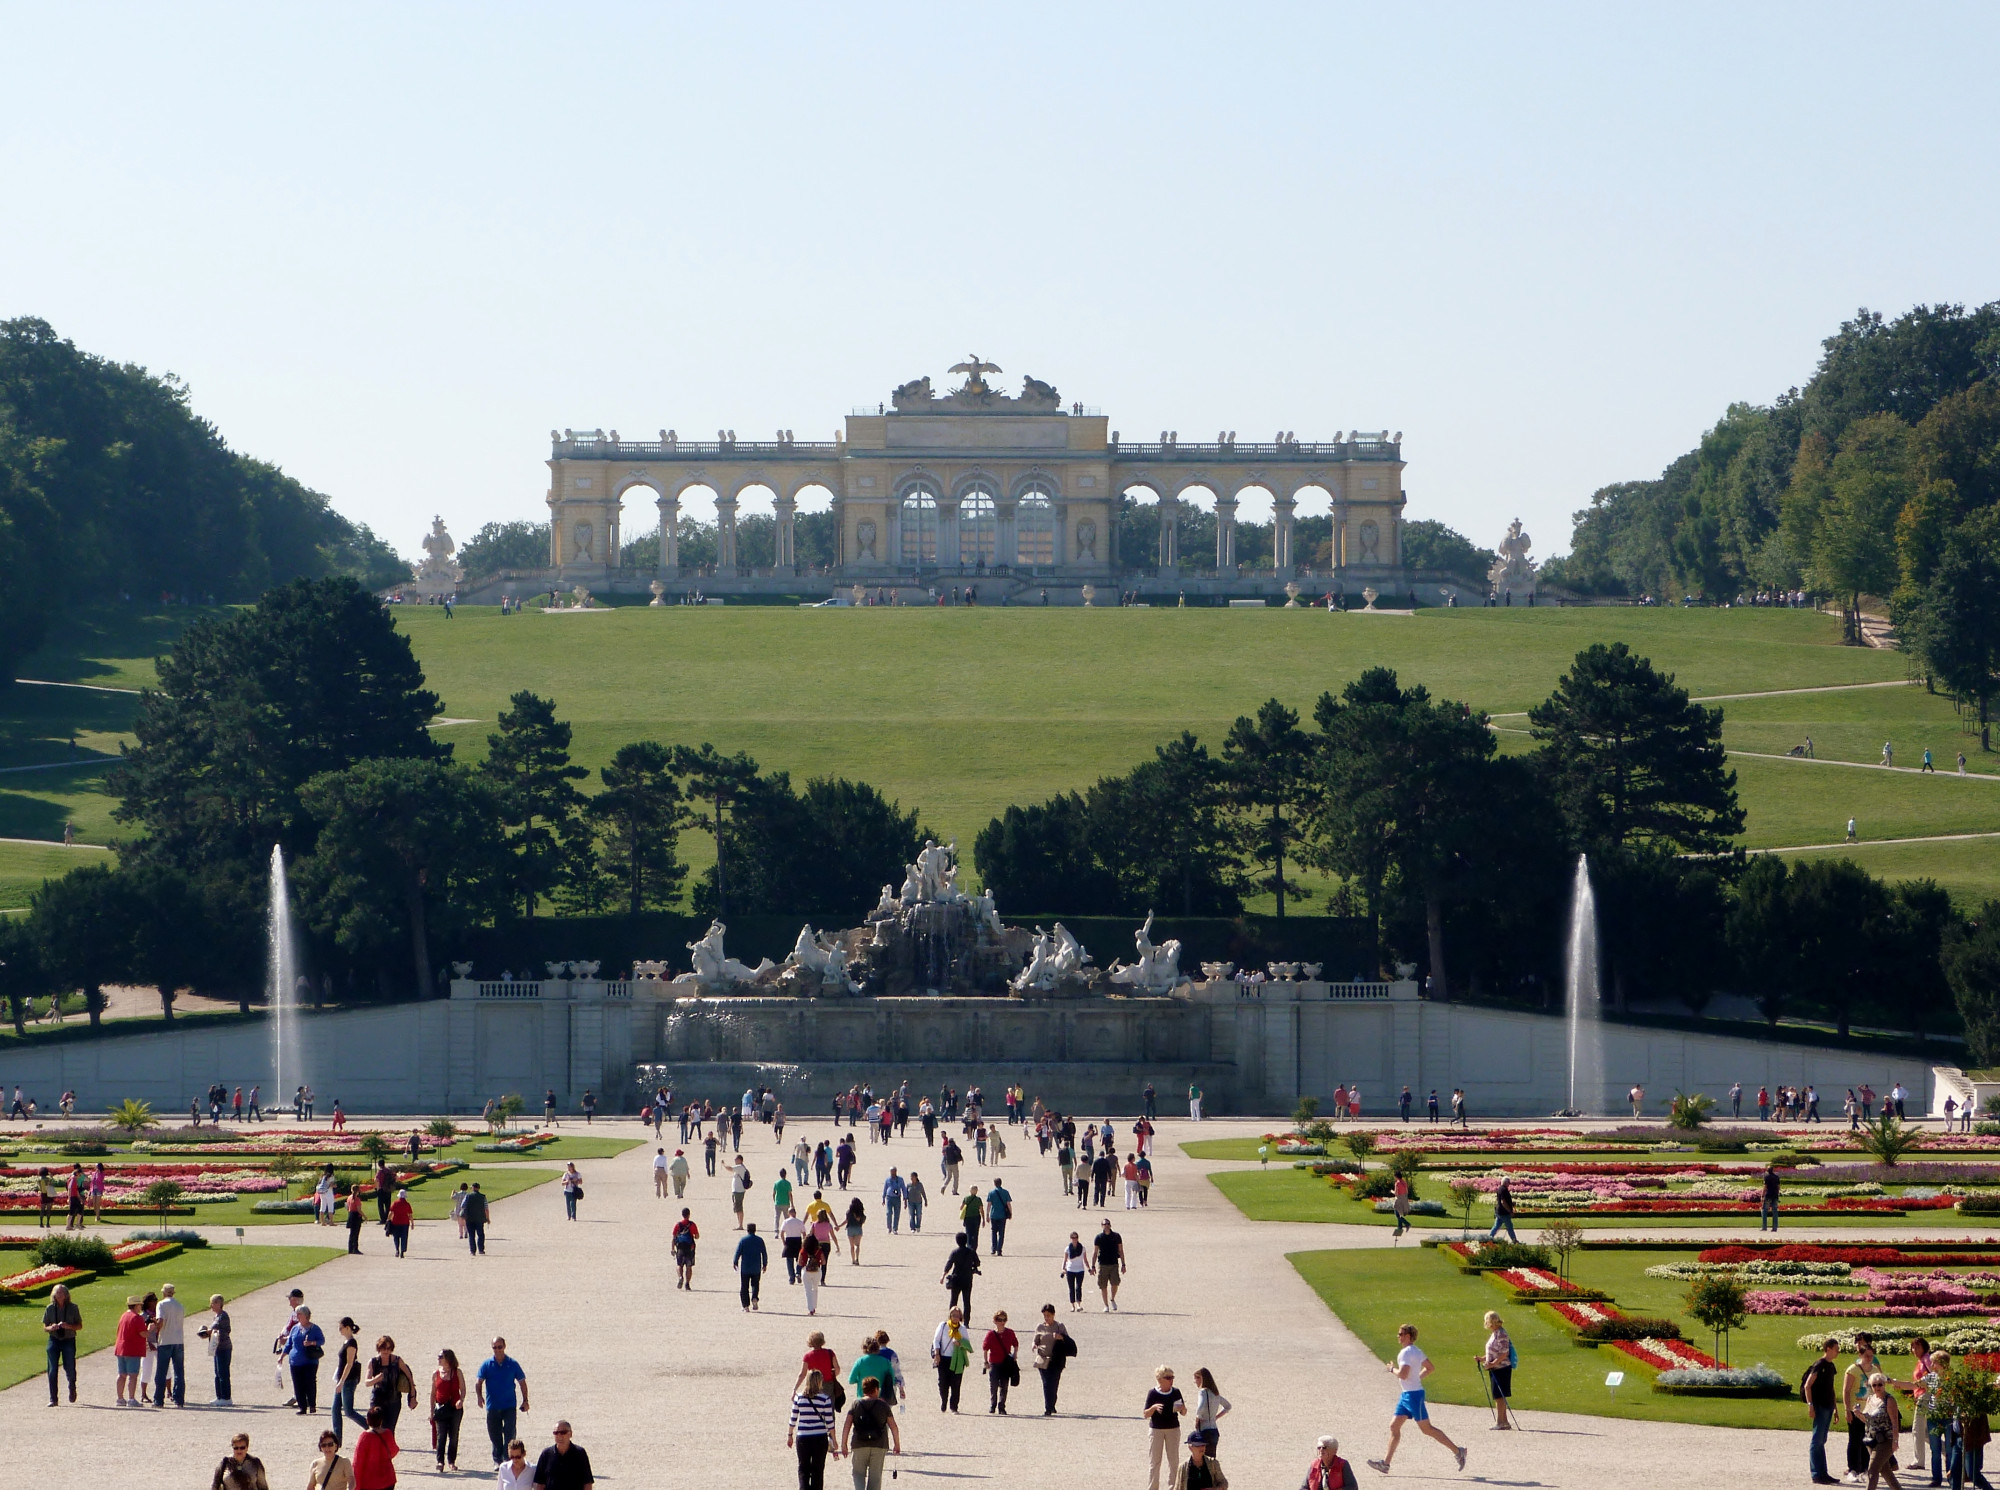 The Gloriette, sitting on a hill behind the Schonbrunn Palace